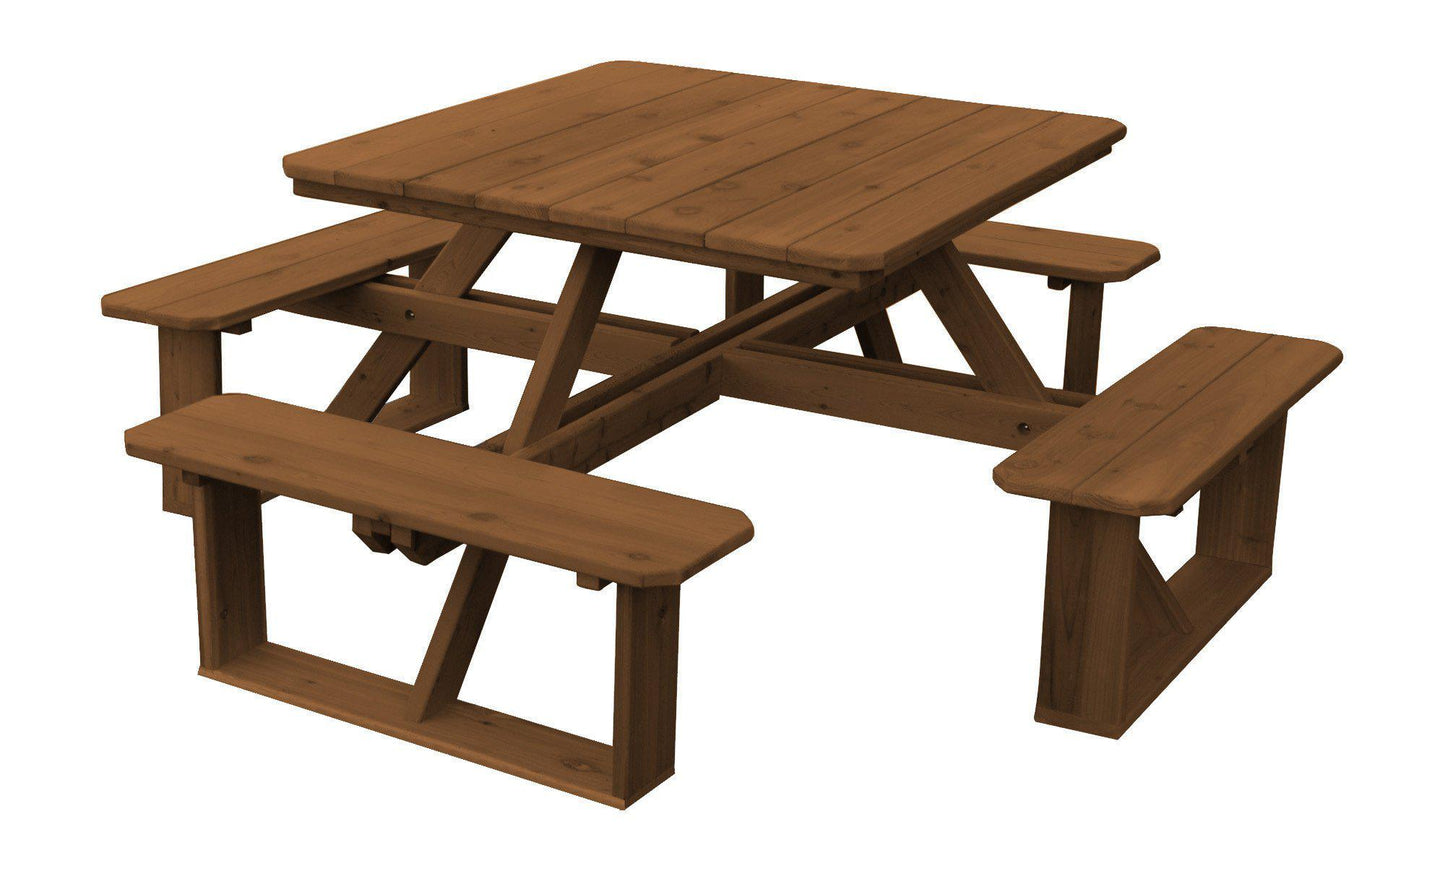 A&L FURNITURE CO. Western Red Cedar 44"  Square Walk-In Table- Specify for FREE 2" Umbrella Hole - LEAD TIME TO SHIP 4 WEEKS OR LESS